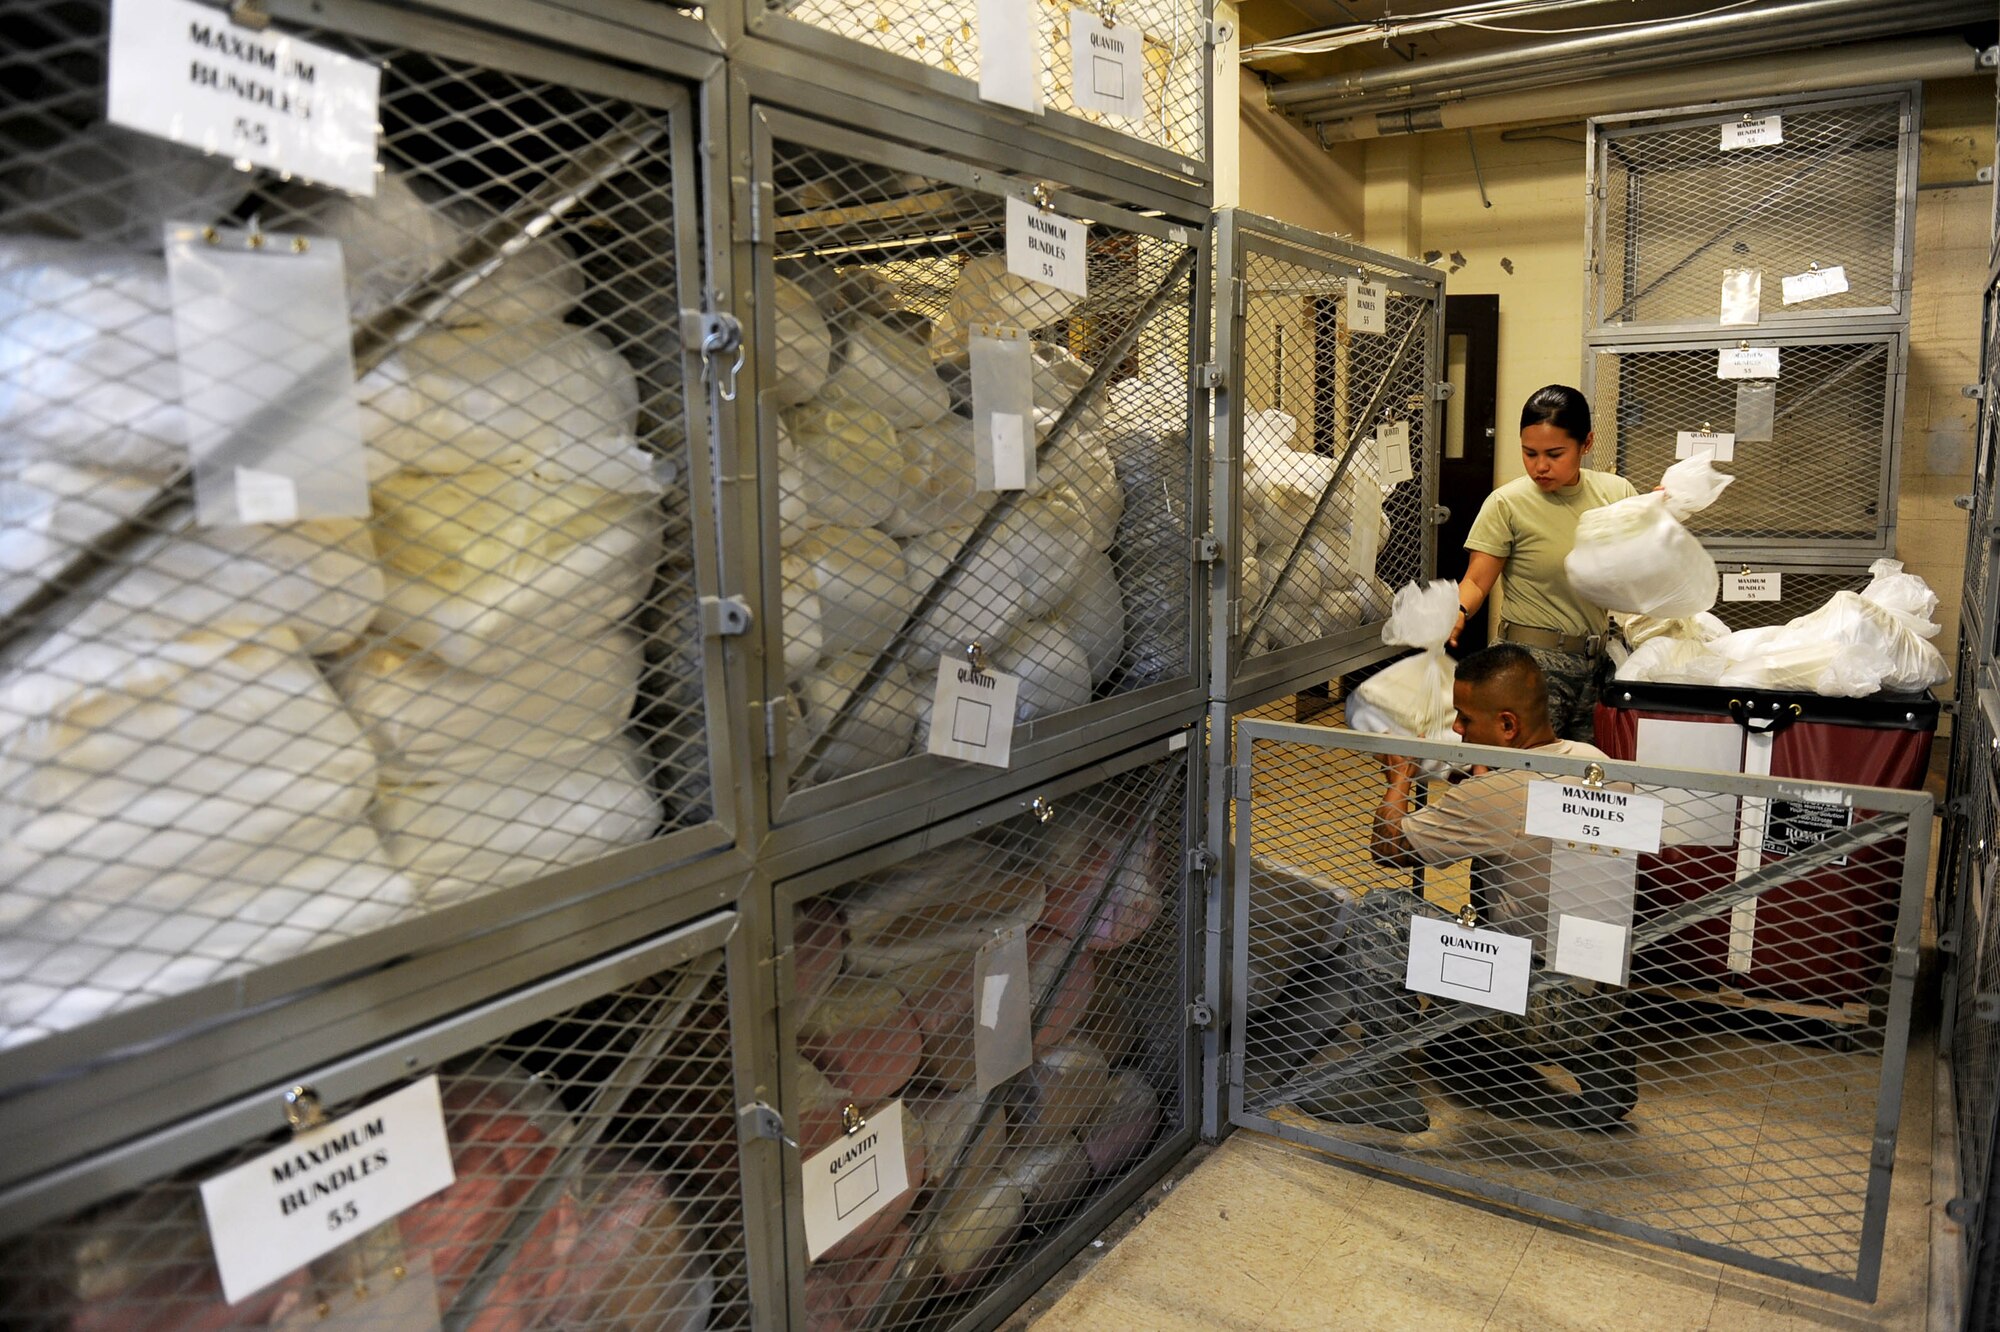 U.S. Air Force Staff Sgts. Joel Valencia and Rosita Francisco, both services craftsmen assigned to the 254th Force Support Squadron, Guam Air National Guard, sort and store linen in the contingency dormitories Aug. 9, 2017, during RED FLAG-Alaska (RF-A) 17-3, at Eielson Air Force Base, Alaska. Valencia and Francisco are part of a five-man team from the 254 FSS supporting RED FLAG-Alaska 17-3, the world’s premier tactical joint and coalition air combat employment exercise. (U.S. Air Force photo by Staff Sgt. Jerilyn Quintanilla)